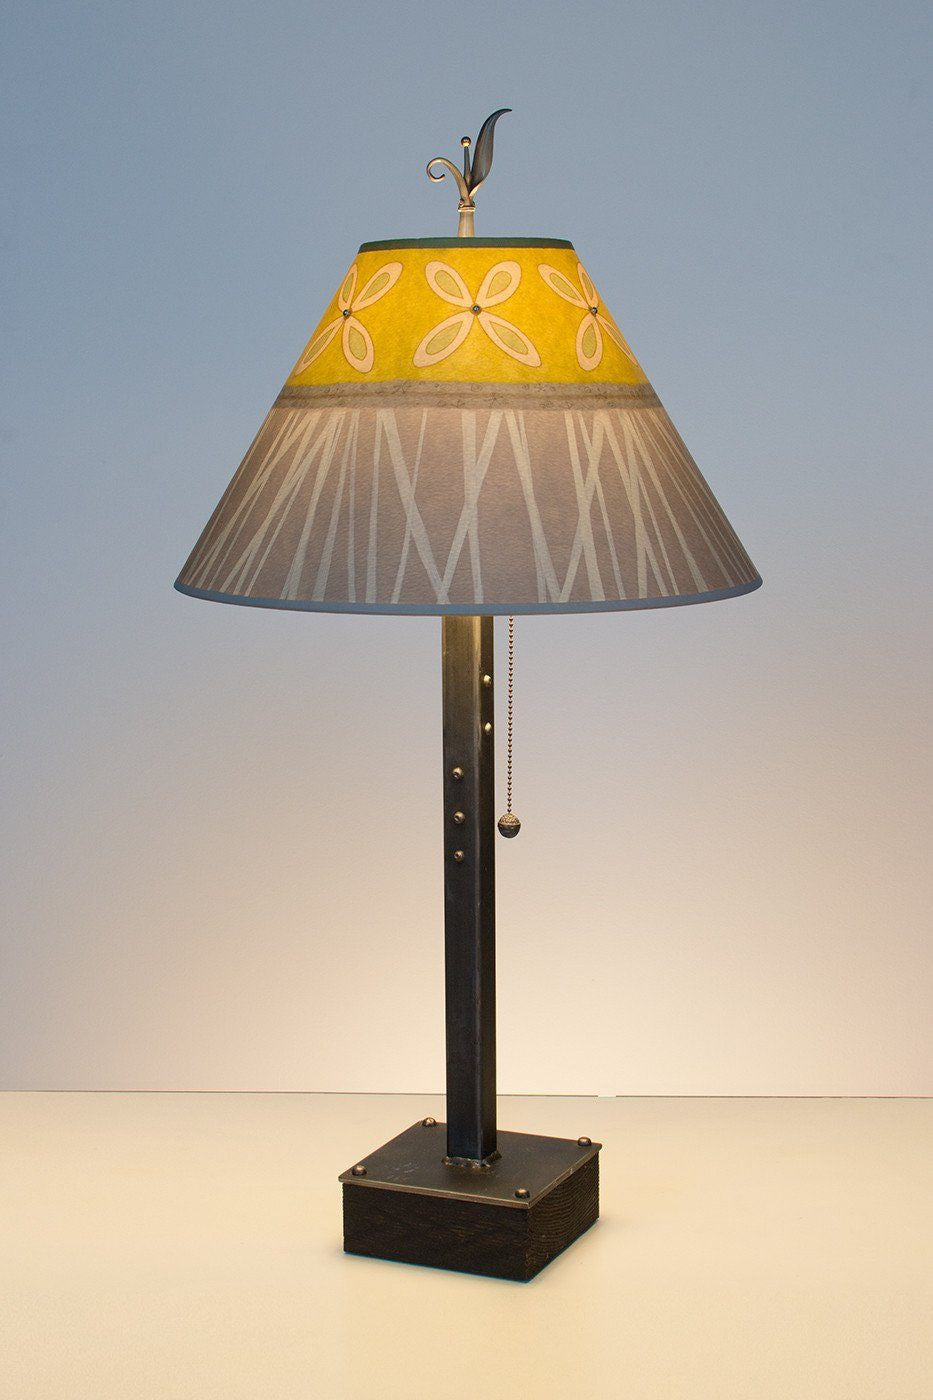 Janna Ugone &amp; Co Table Lamps Steel Table Lamp on Wood with Medium Conical Shade in Kiwi